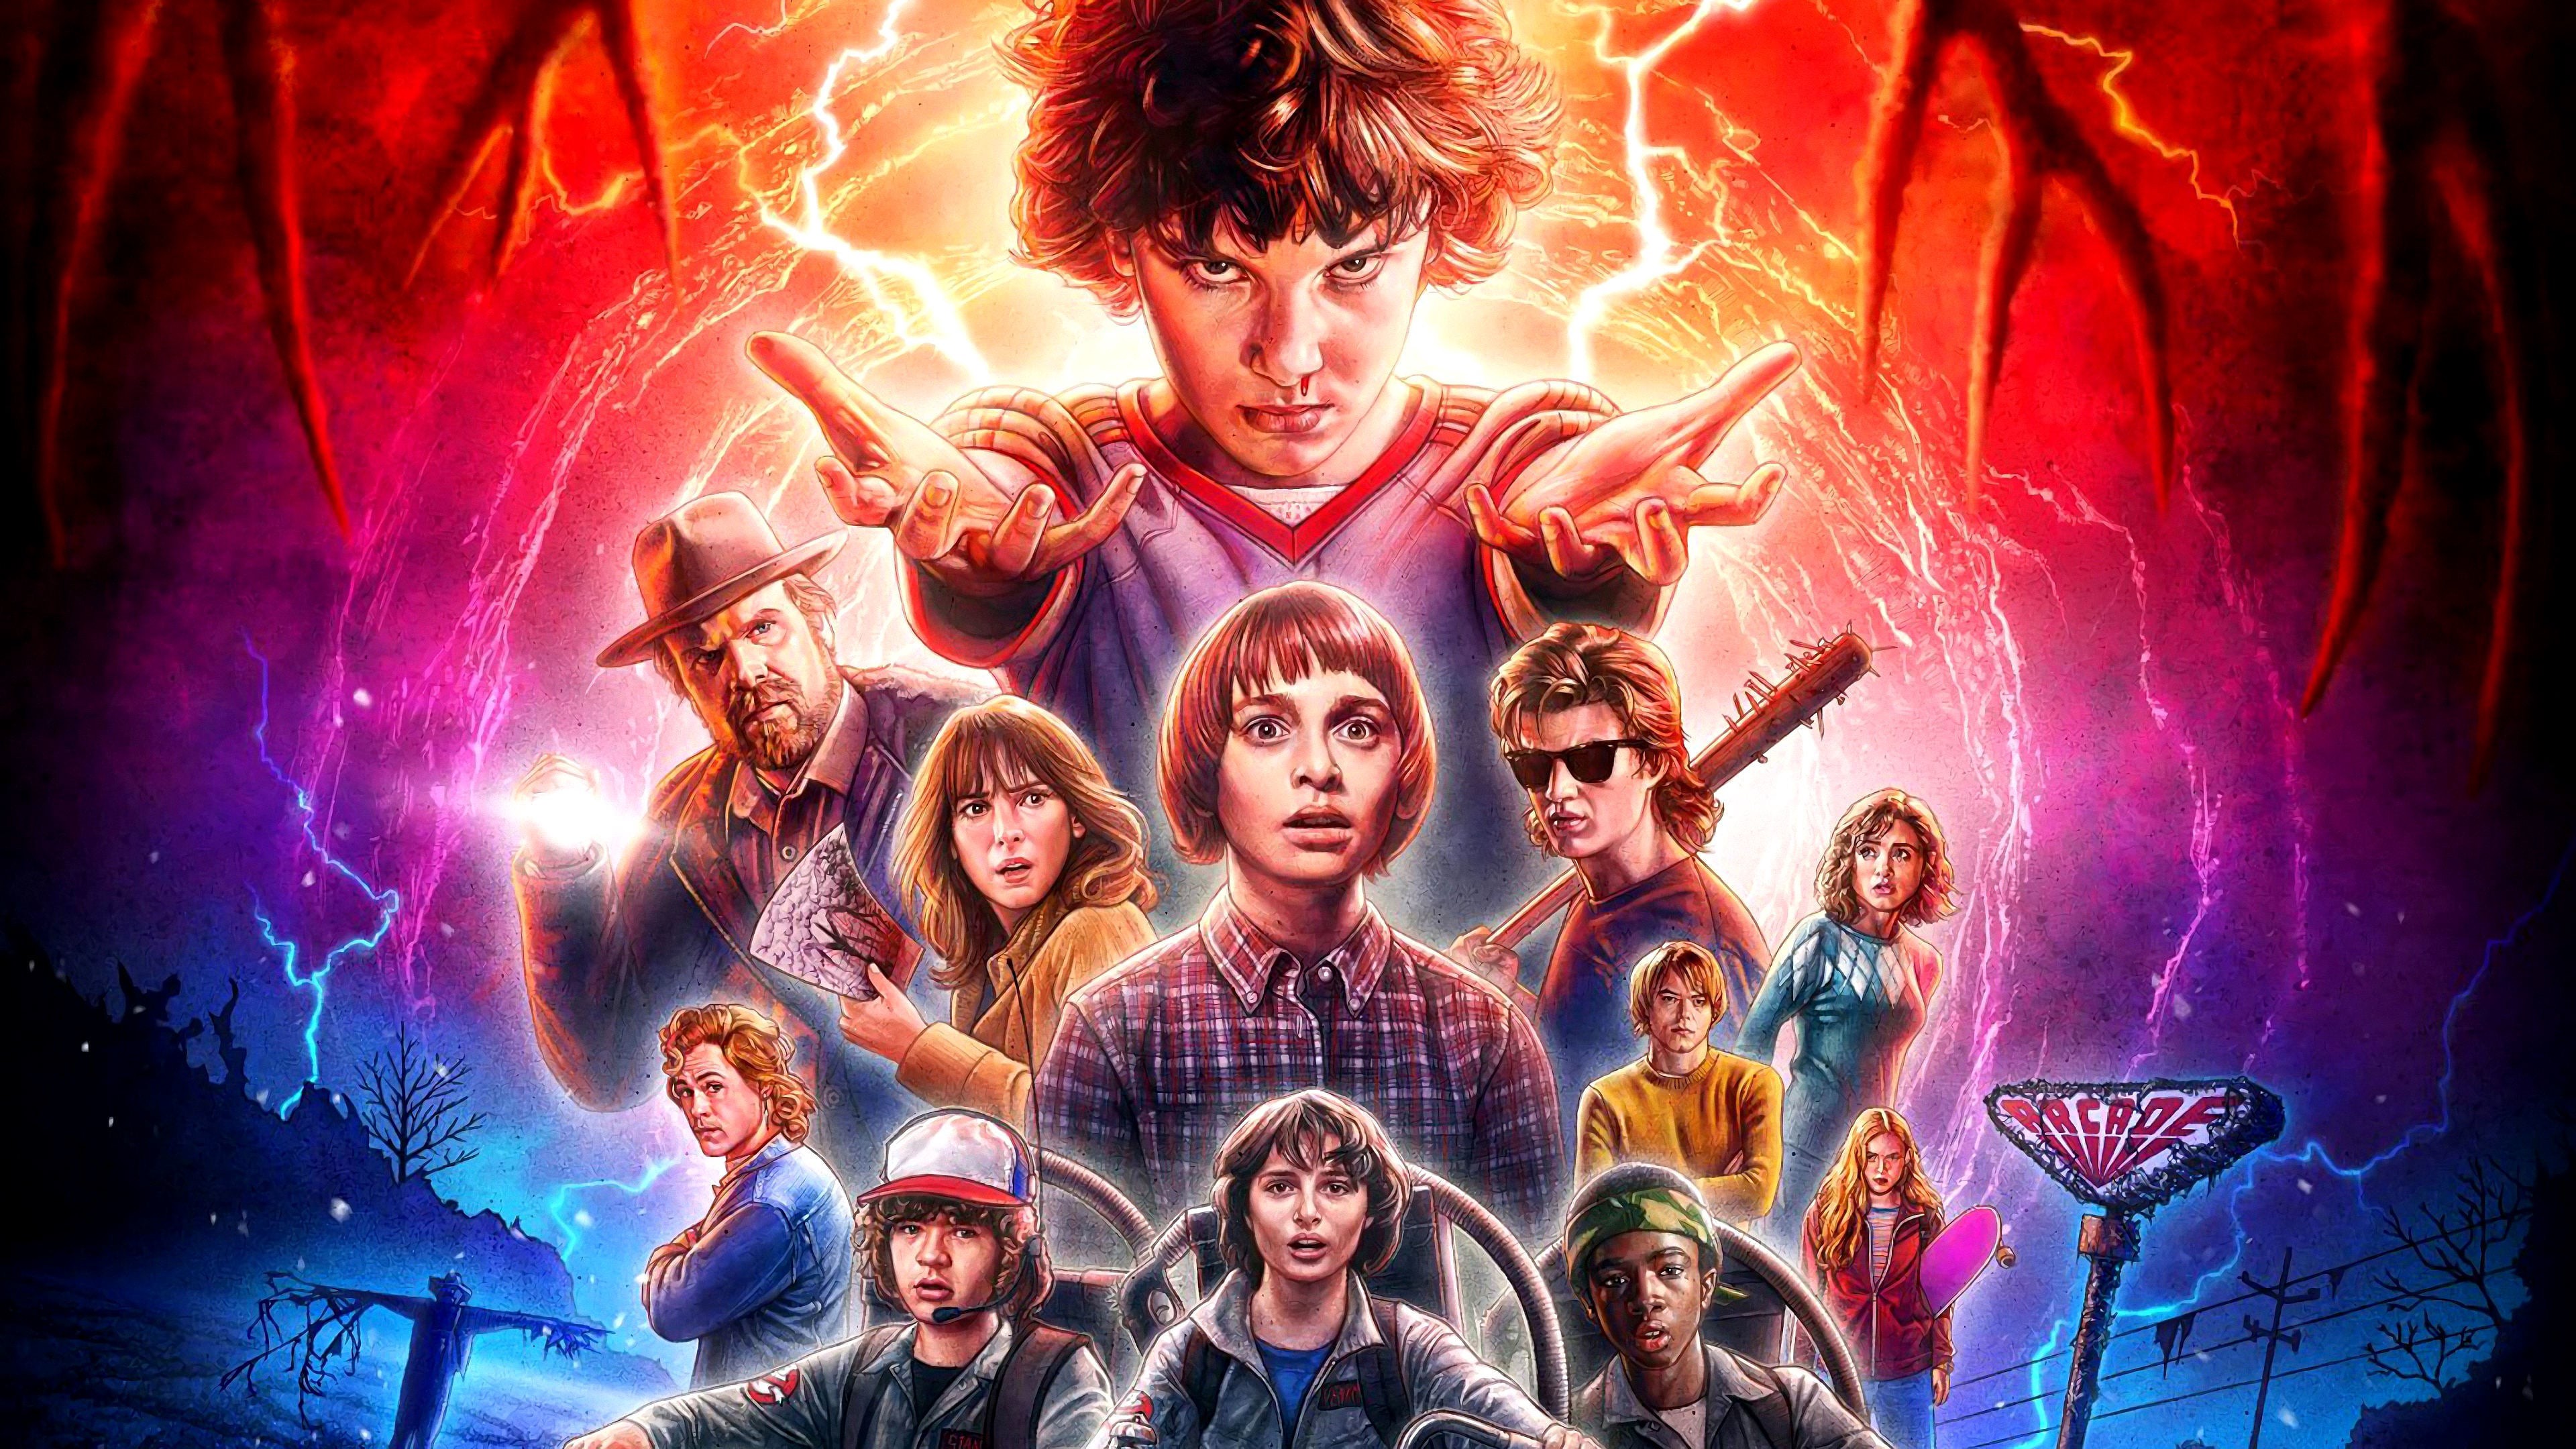 Stranger Things Season 4: Release Date, Cast and Updates! - DroidJournal